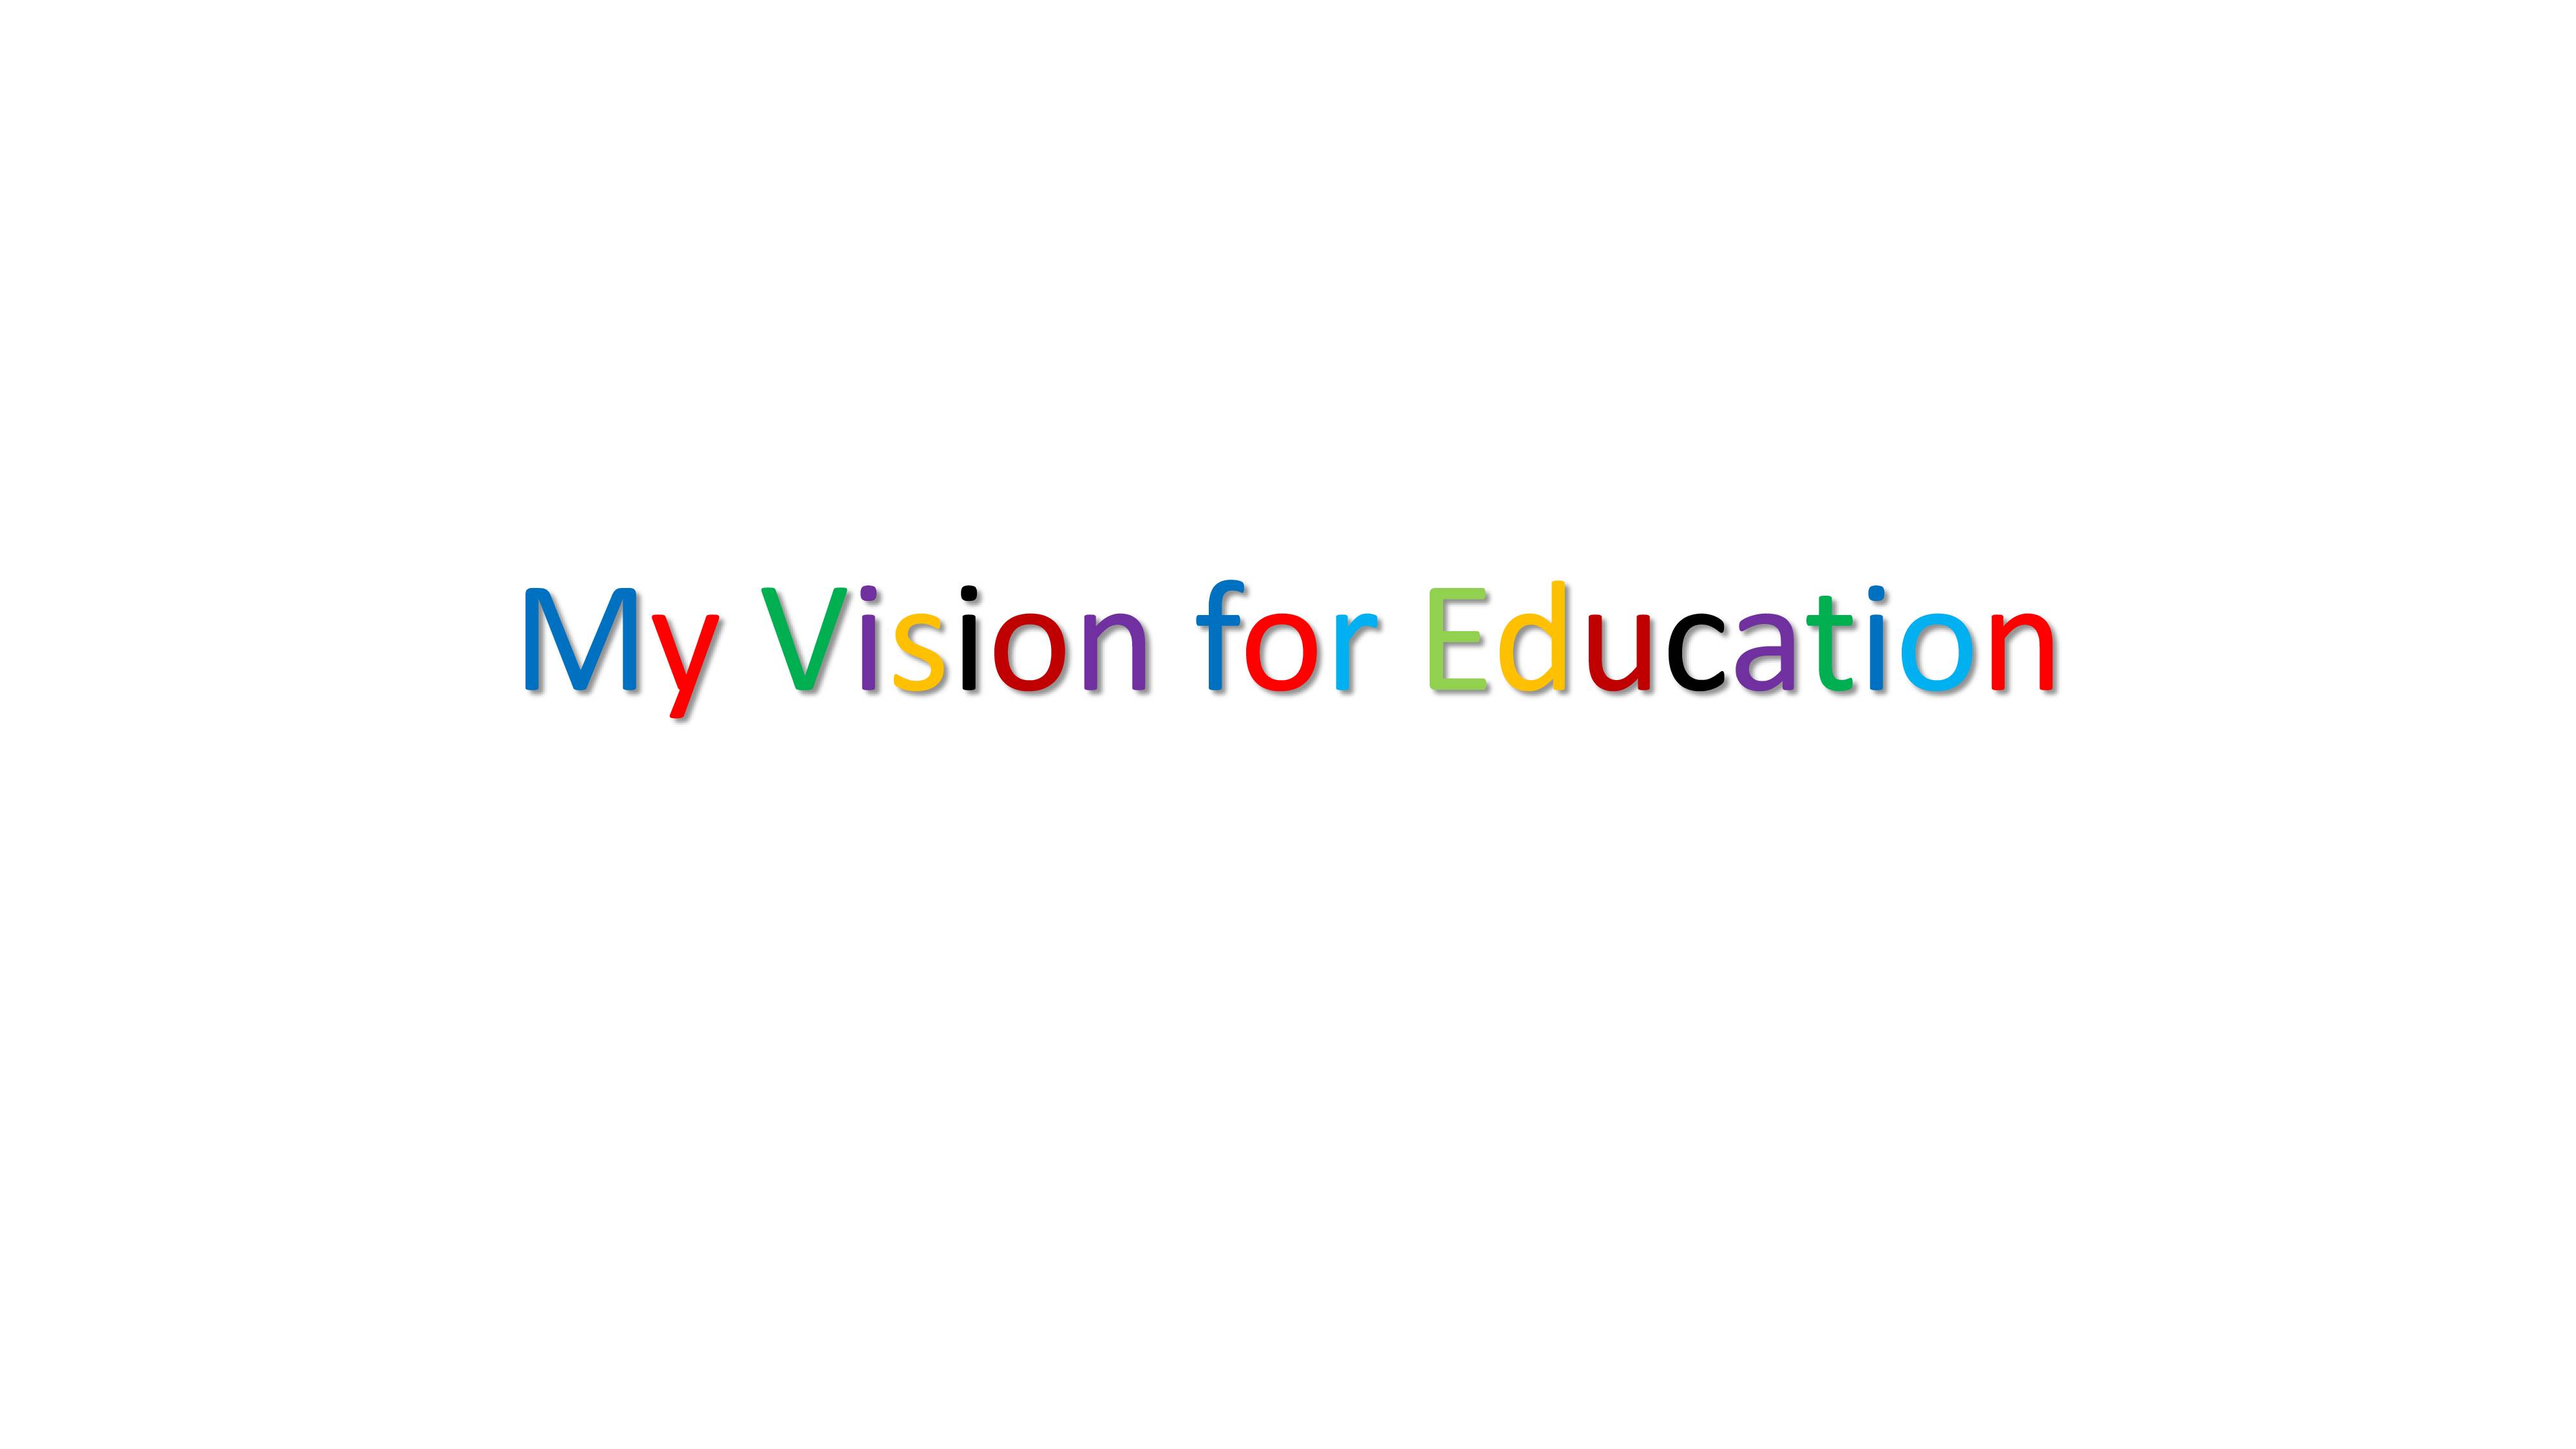 My vision for education